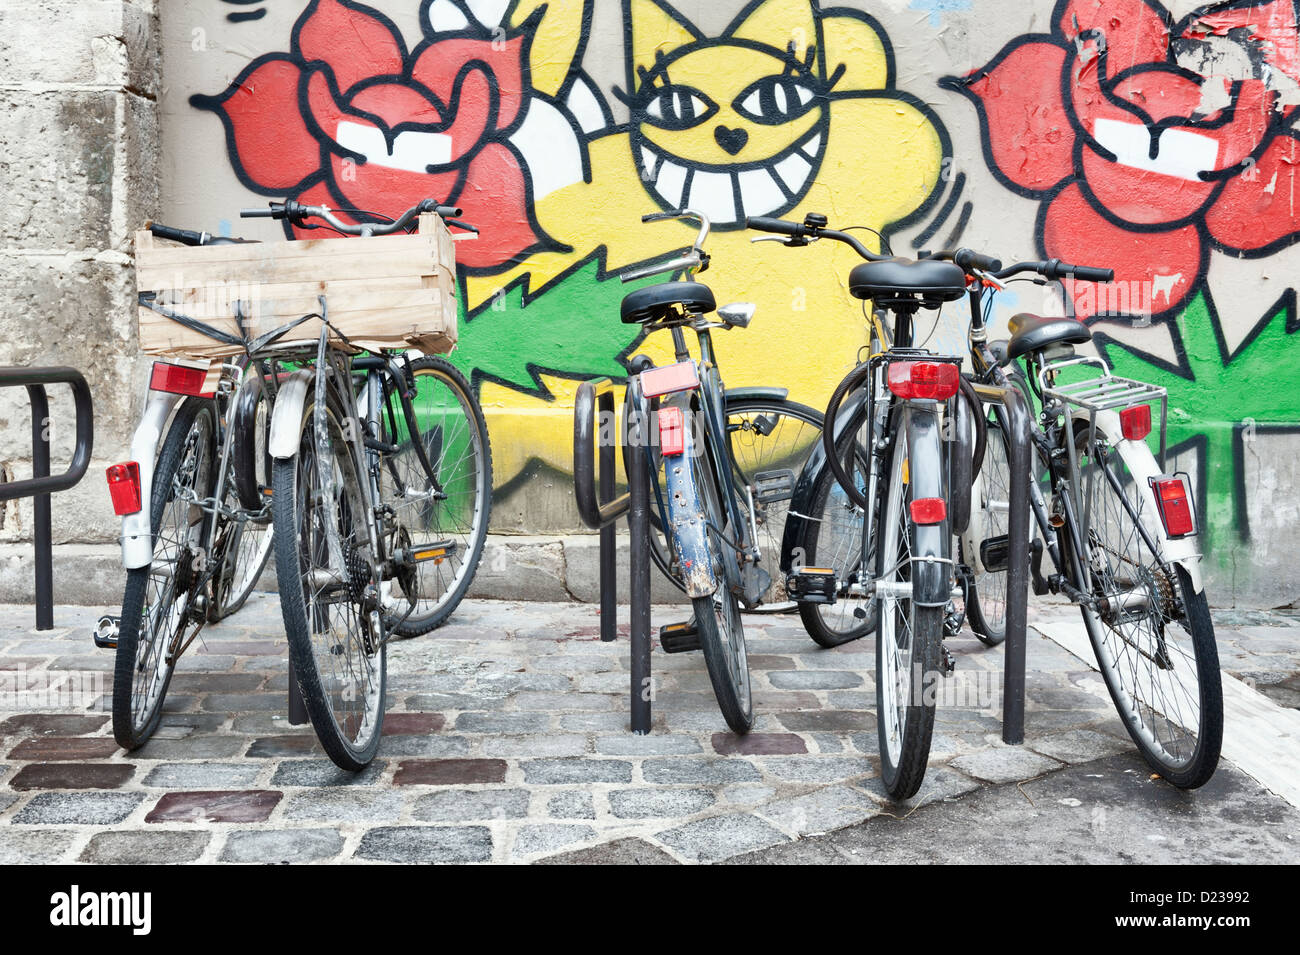 PARIS, FRANCE: Old bicycles parked haphazardly on the street Stock Photo